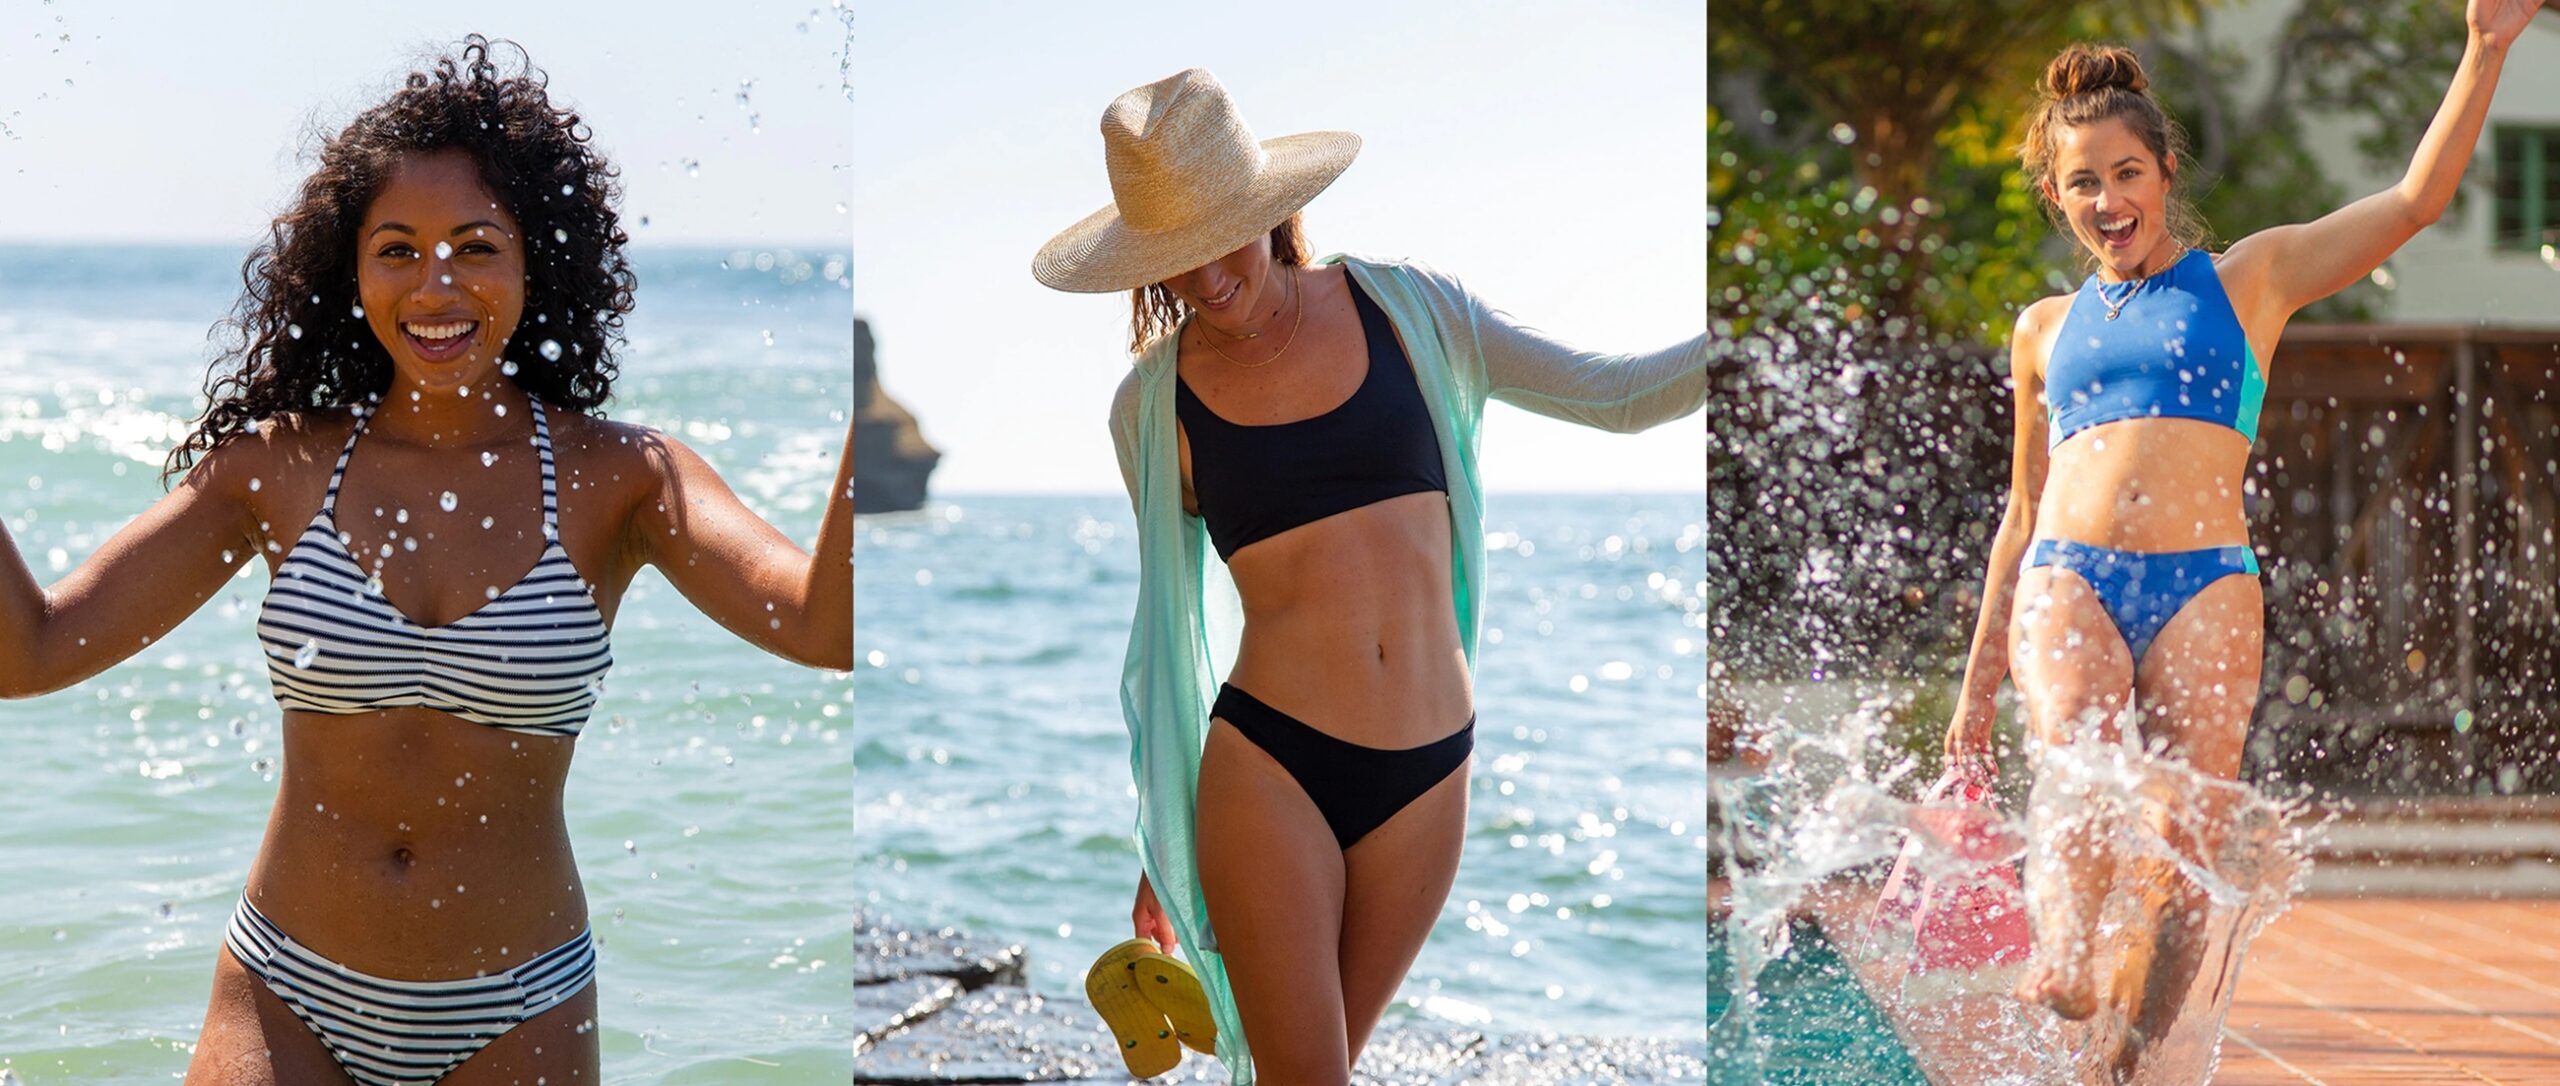 Carve Designs: Stylish and Sustainable Swimwear and Activewear